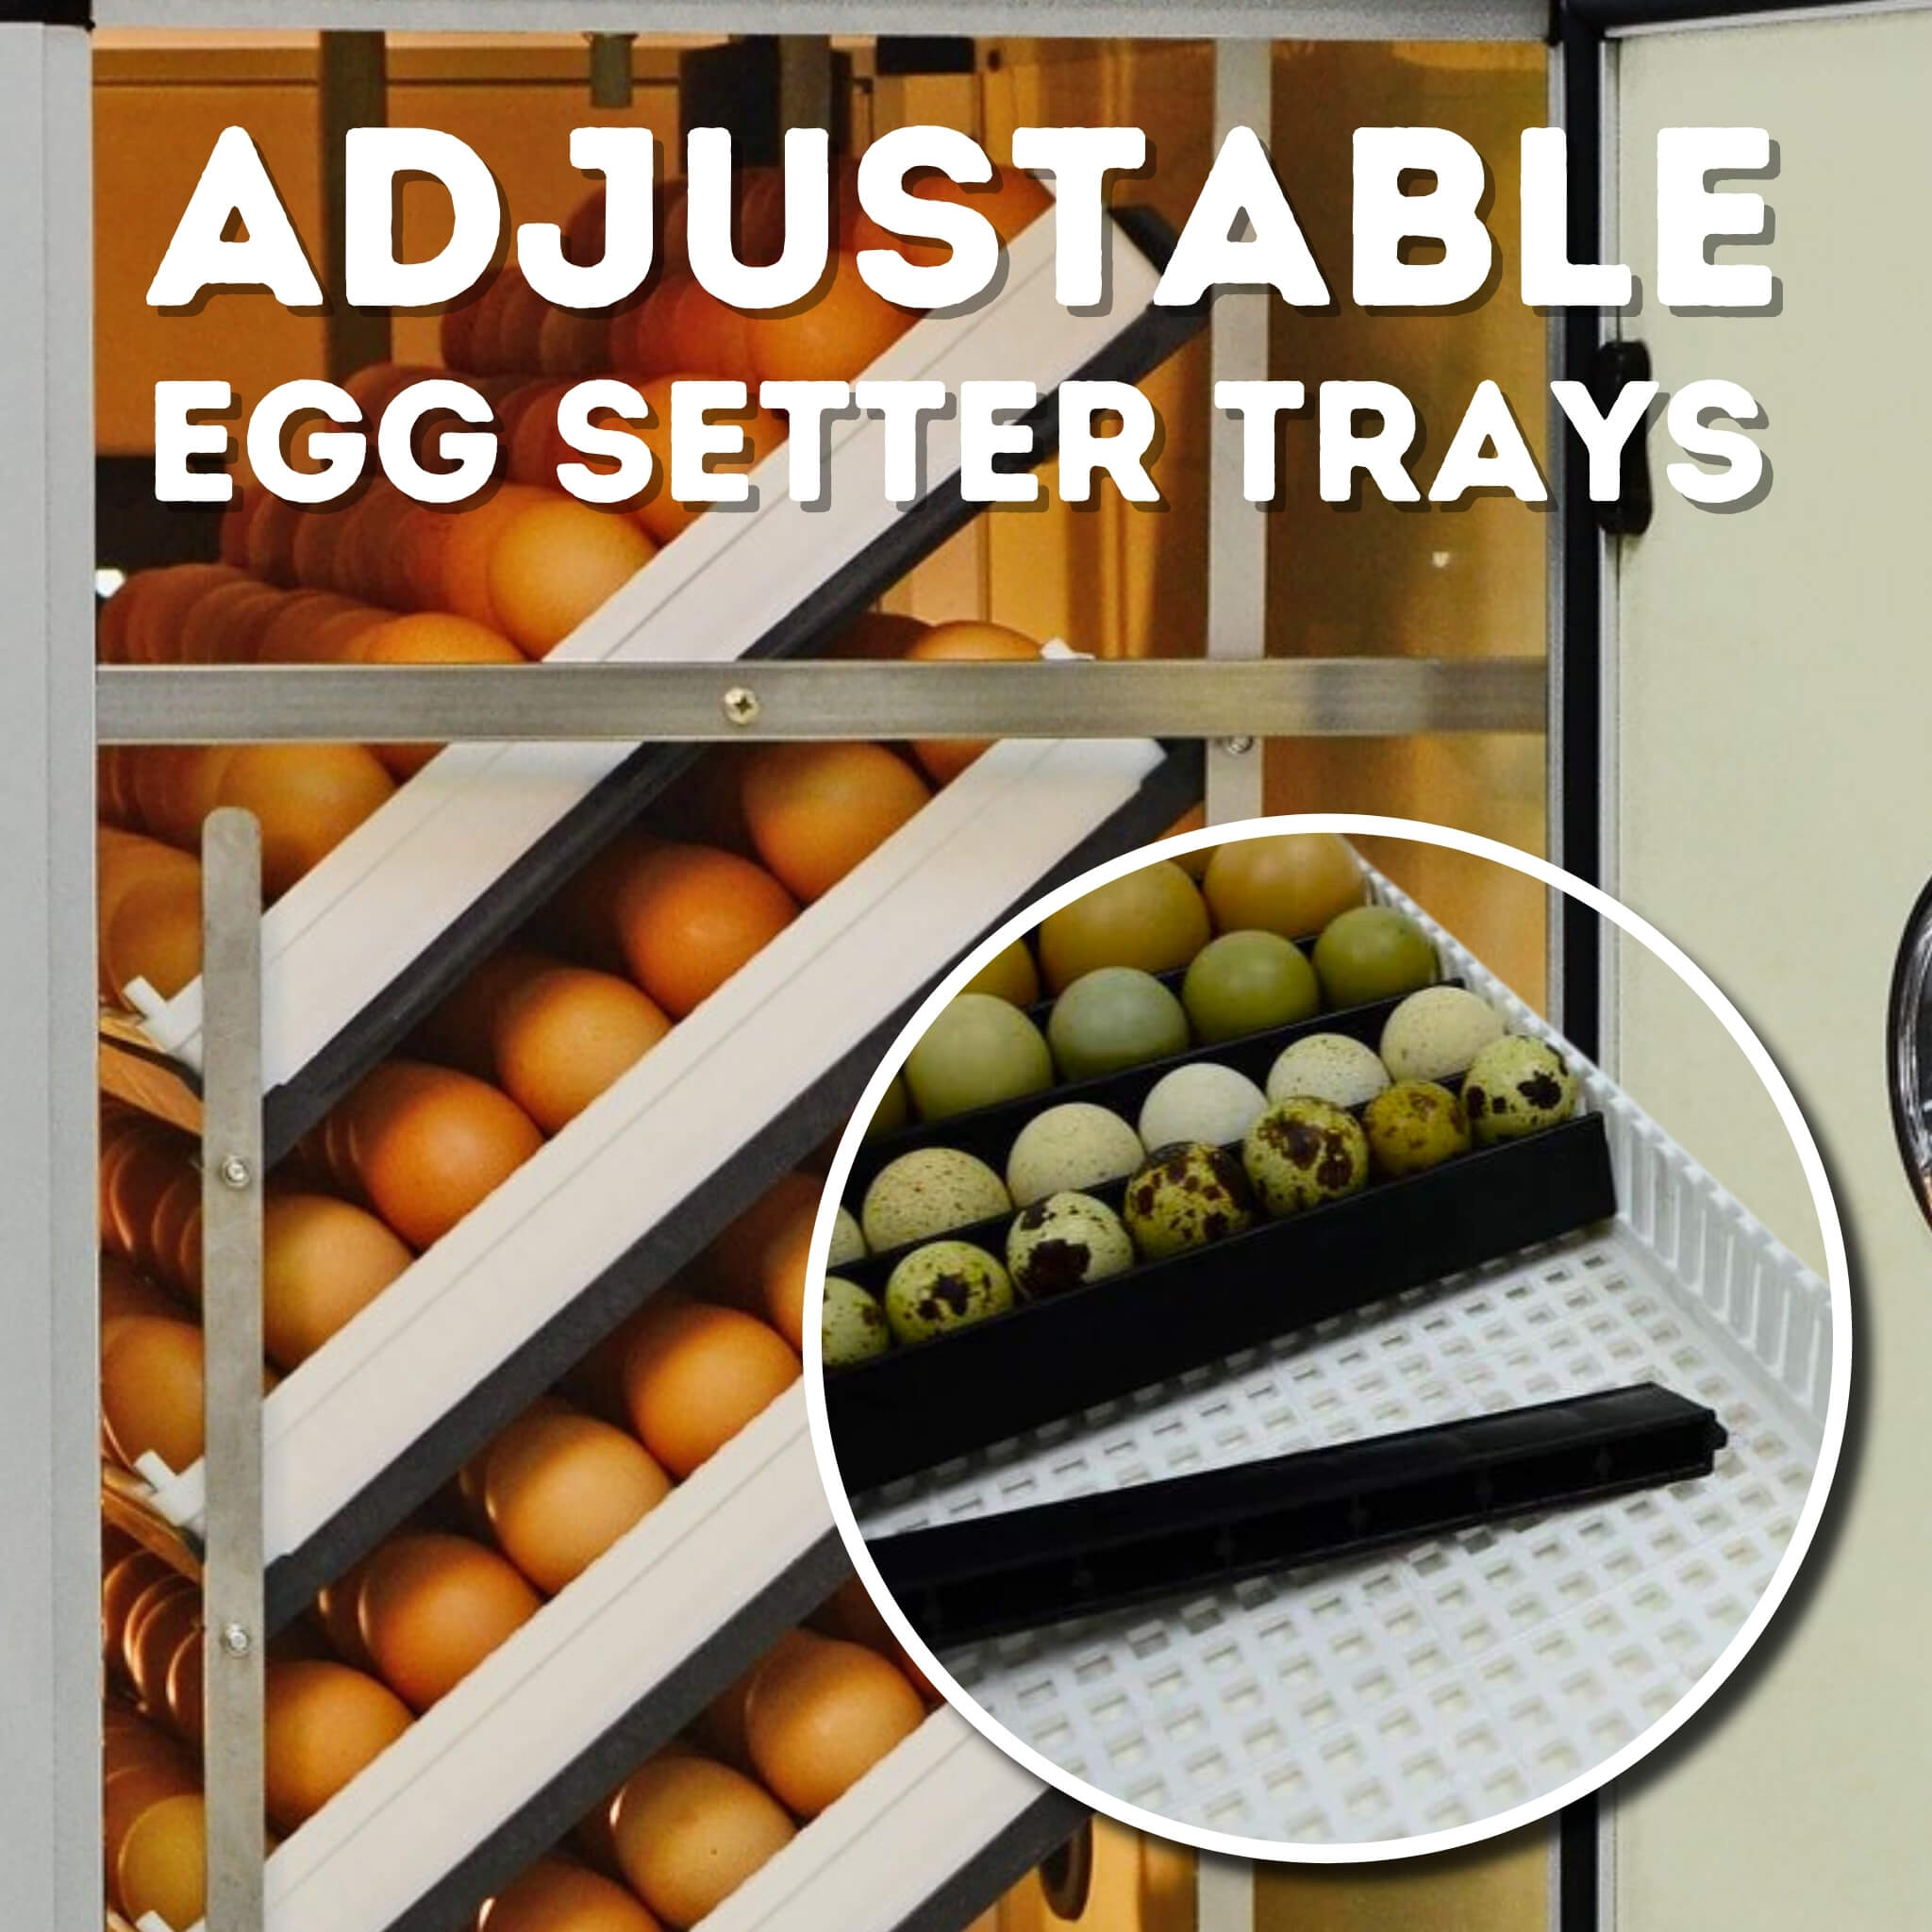 Hatching Time Cimuka. Close-up of adjustable egg setter trays in Cimuka HB500C, showcasing customizability for different egg sizes, an innovative feature for poultry breeders.